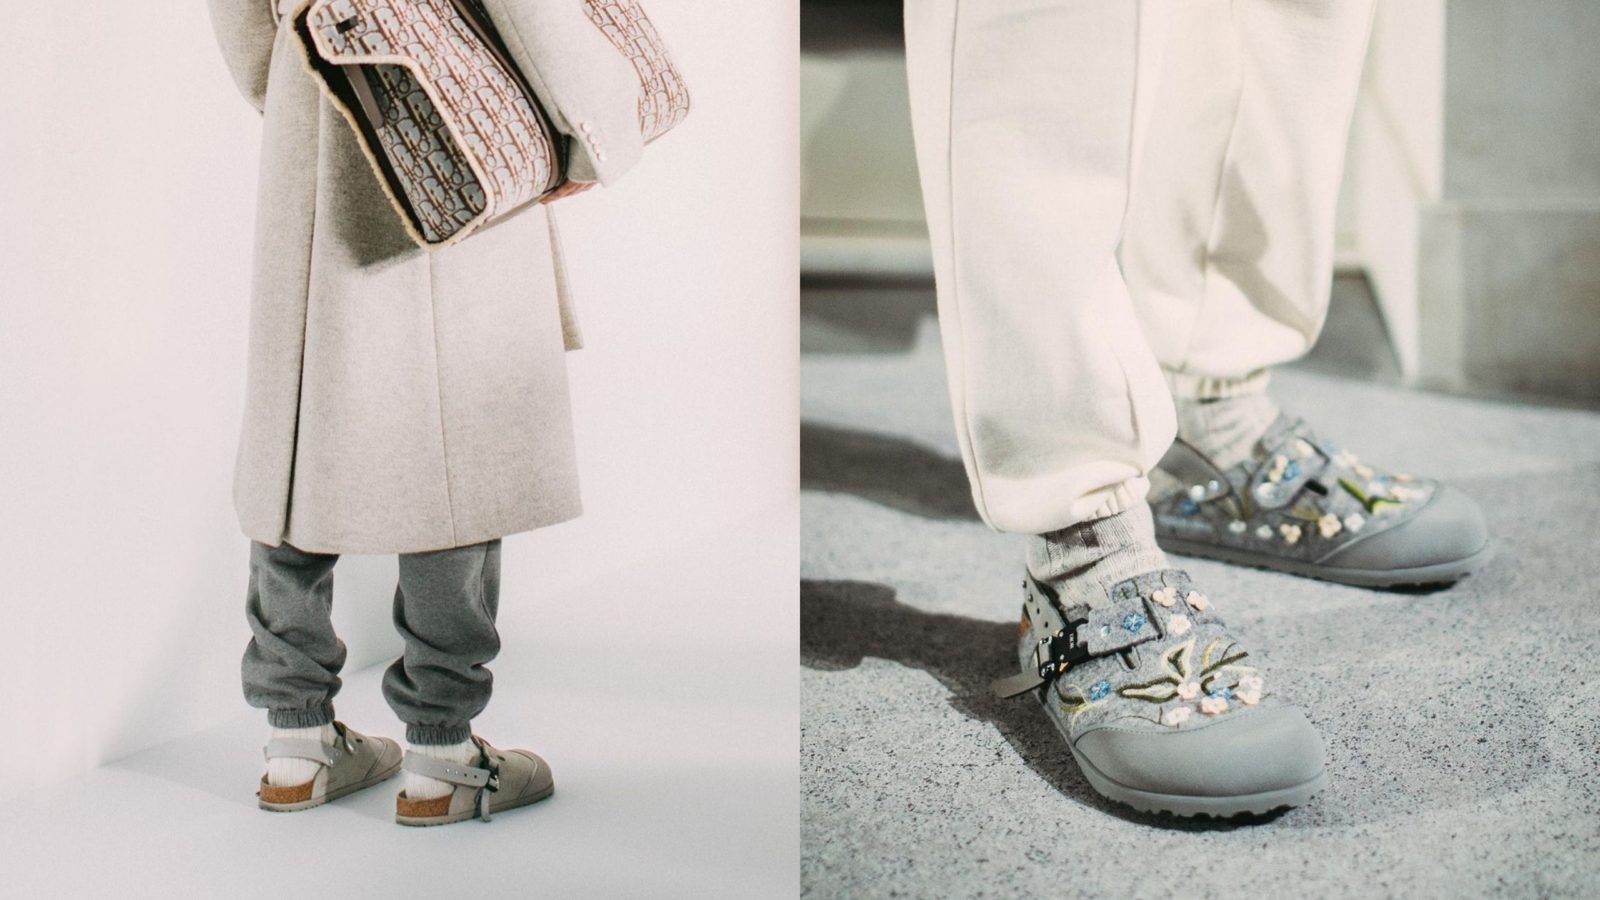 ‘Lab Report: Dior remixes the Birkenstock garden clog with floral accents